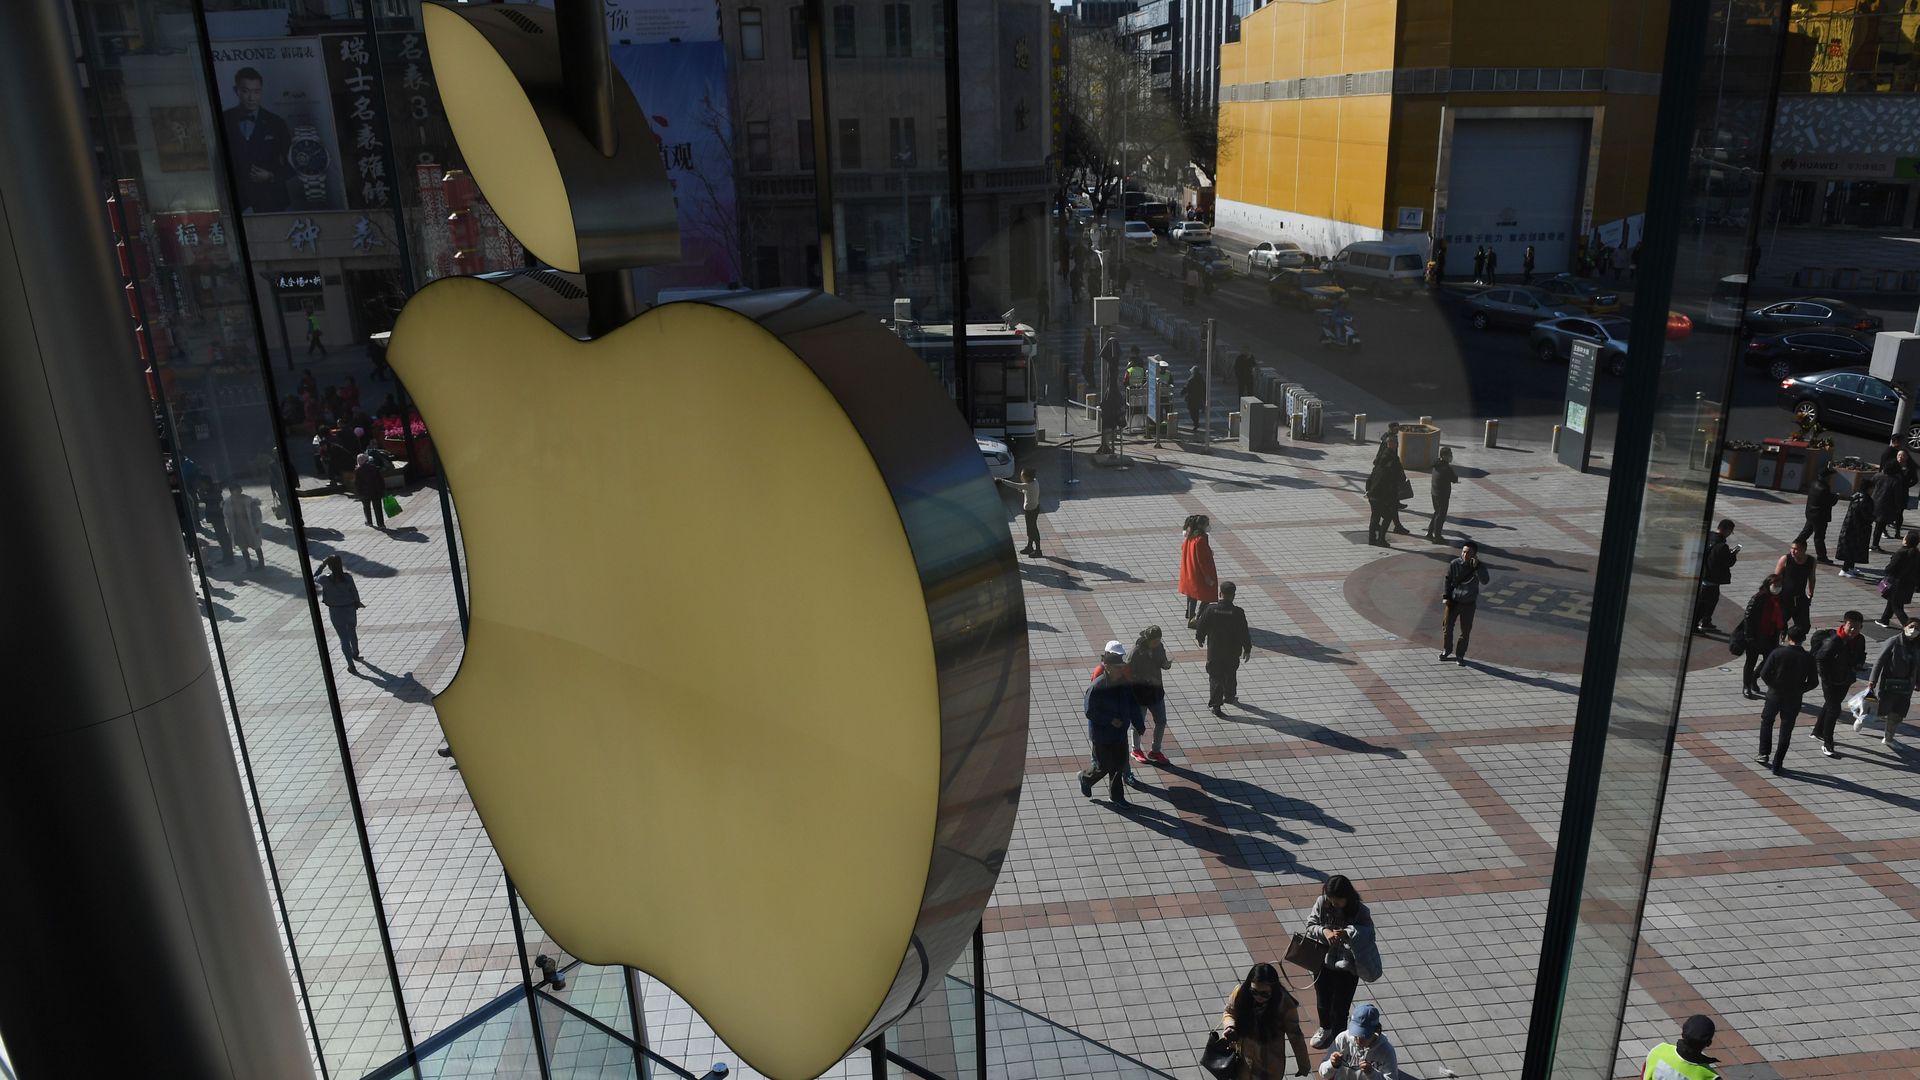 In this image, the Apple logo is displayed over a city walkway with a few pedestrians. 